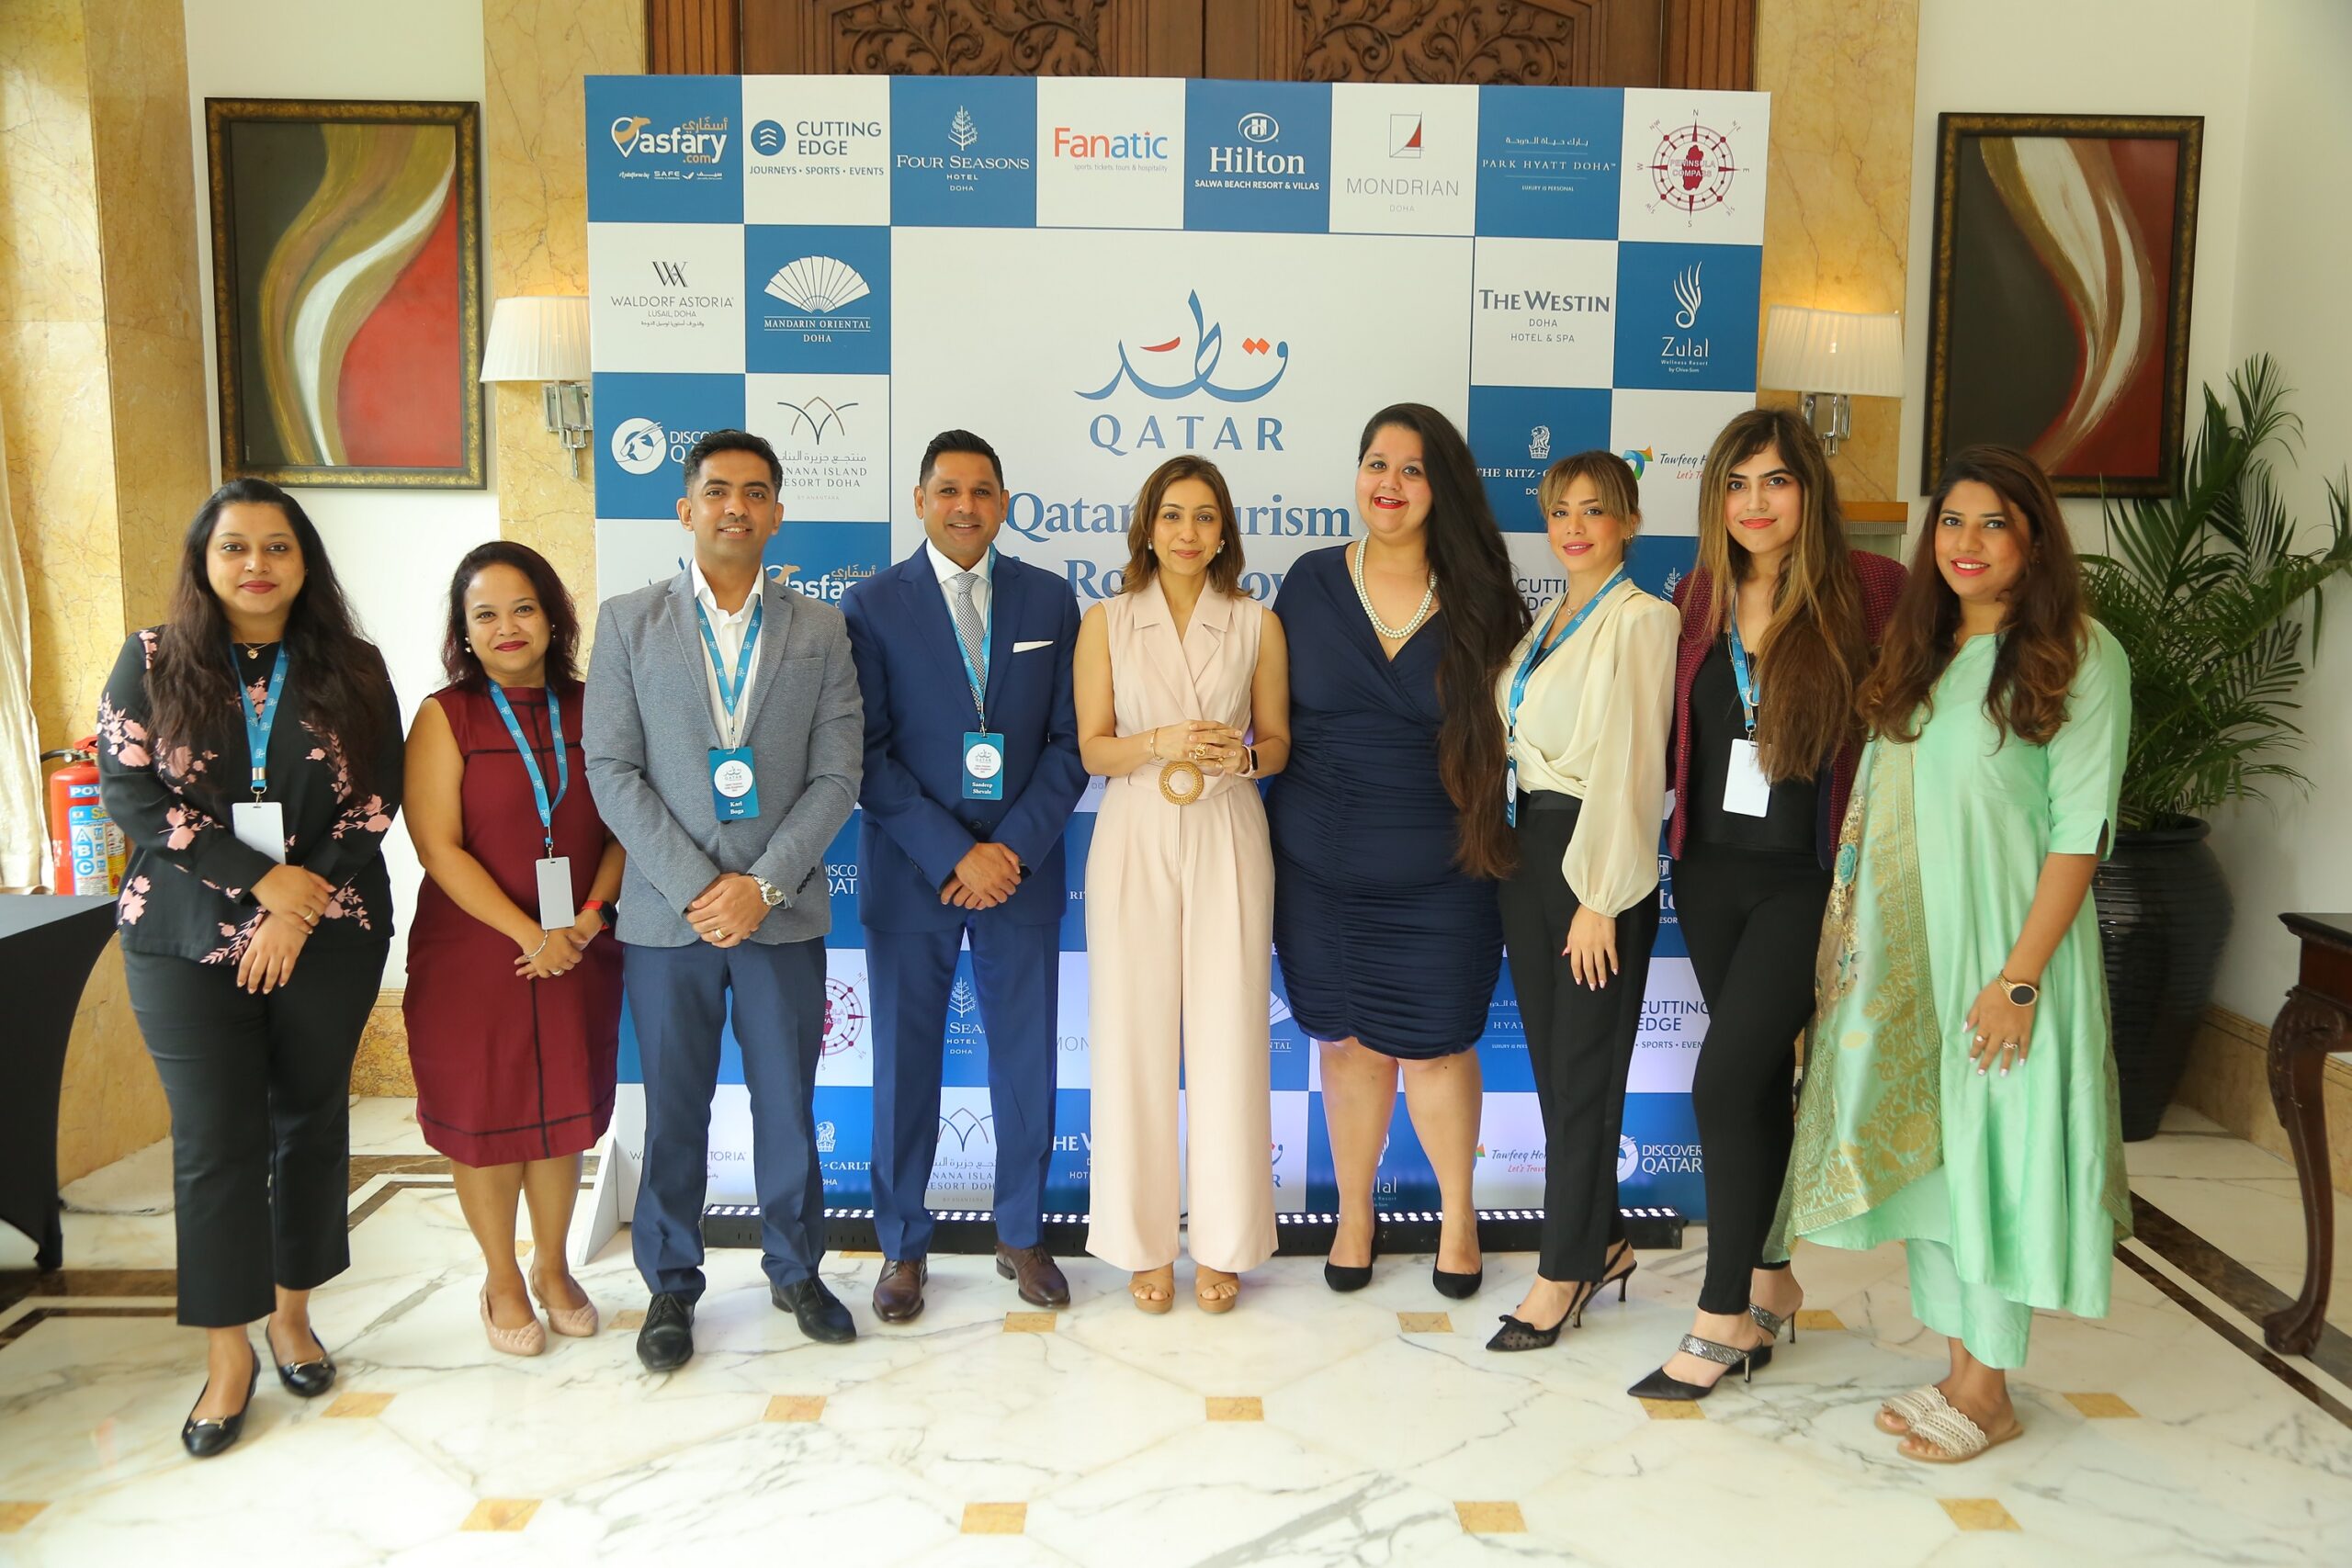 With upcoming Football World Cup in sight, Qatar Tourism conducts two-city India roadshow